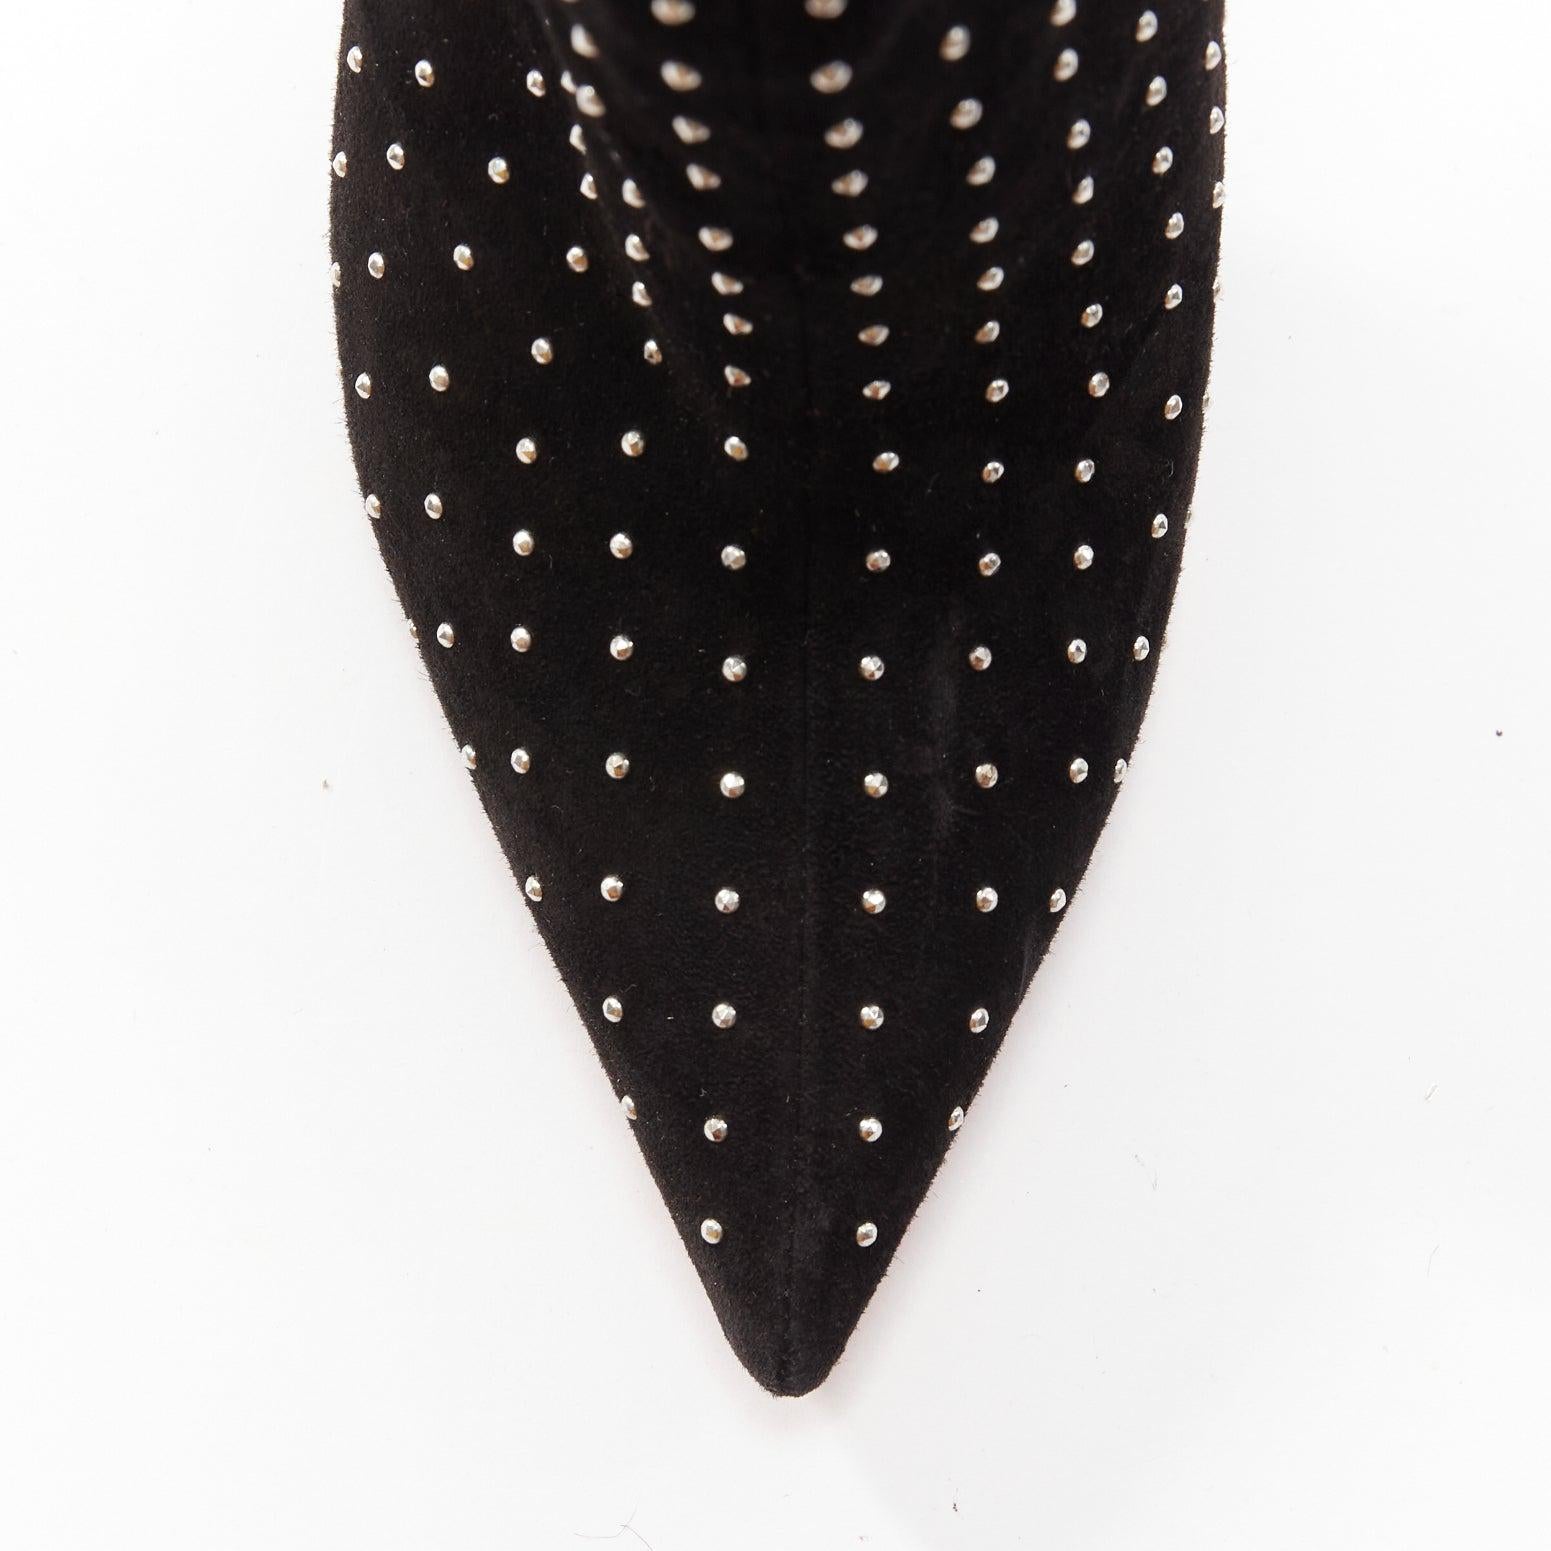 CHRISTIAN LOUBOUTIN So Kate Booty black suede micro stud embellished pointy EU36 For Sale 2